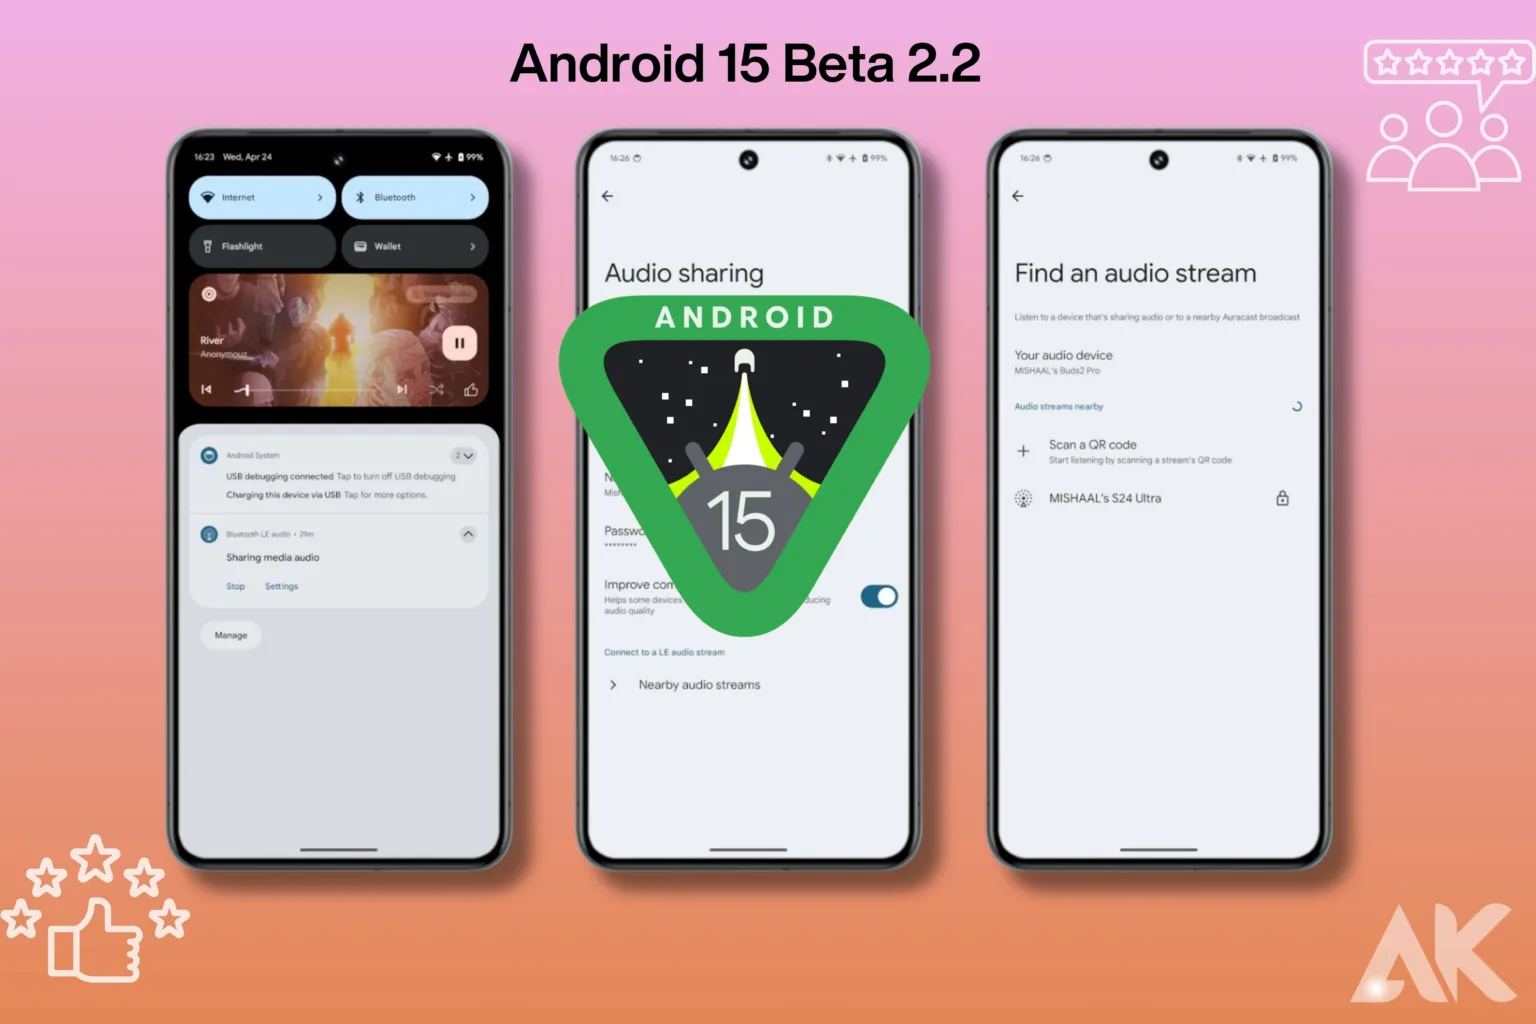 Android 15 Beta 2.2 review